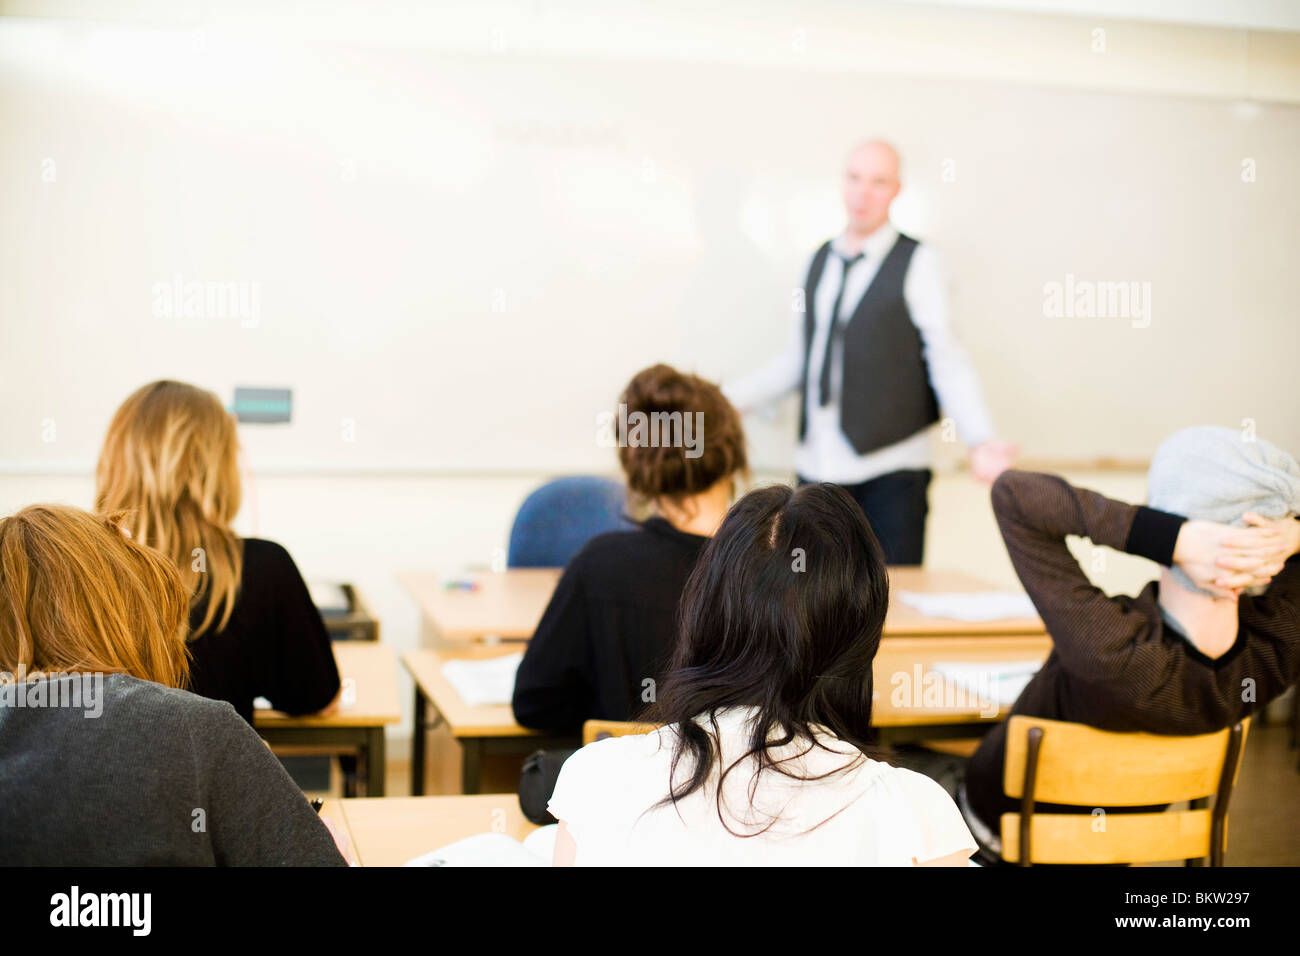 Classroom with students and teacher Stock Photo